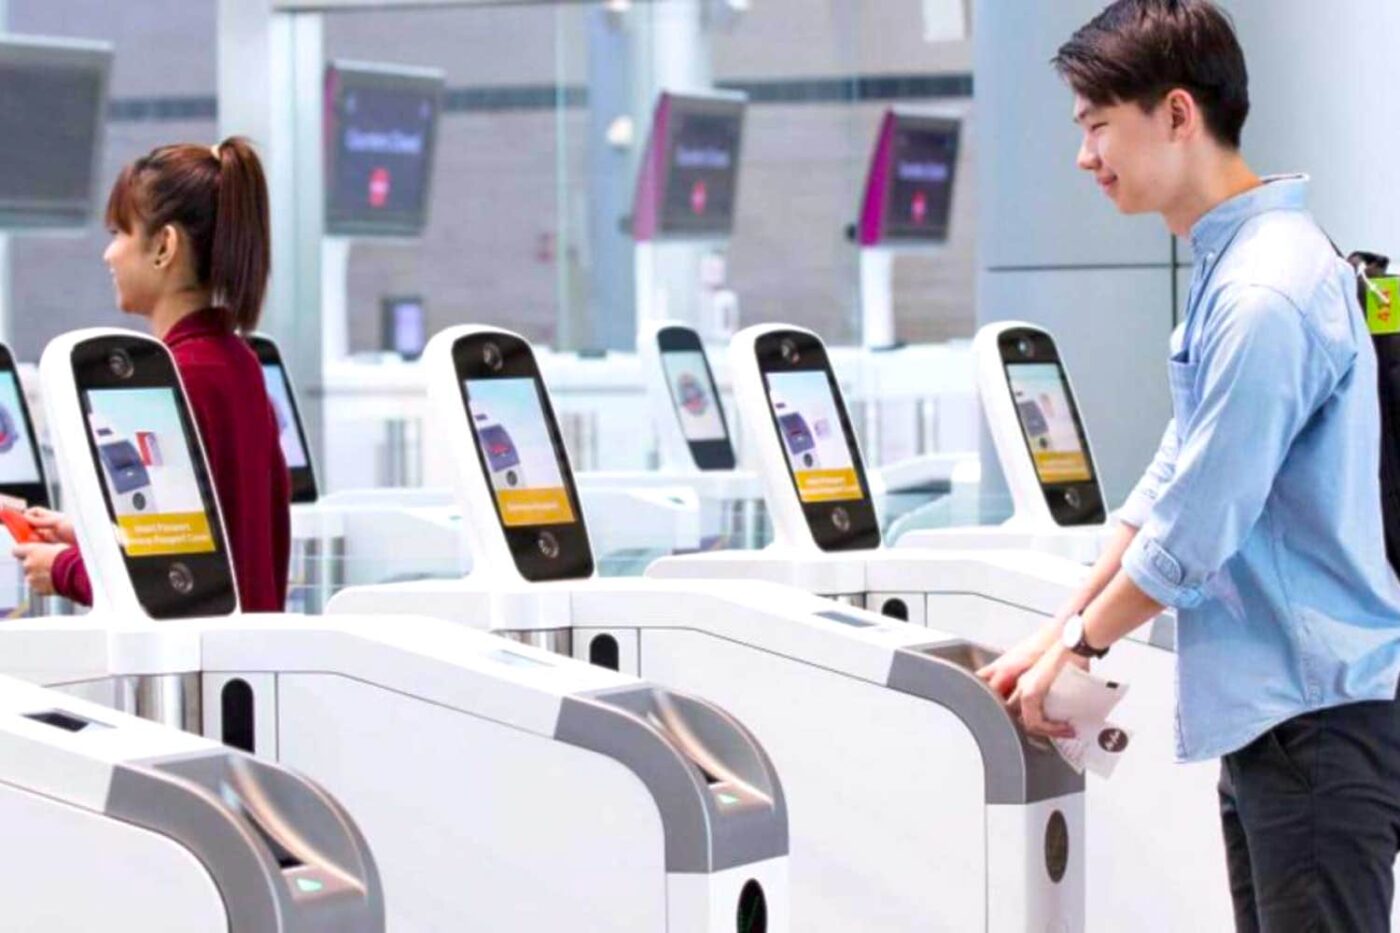 Passport-Free Travel Has Officially Arrived As Singapore Airport Swaps Paper For Data